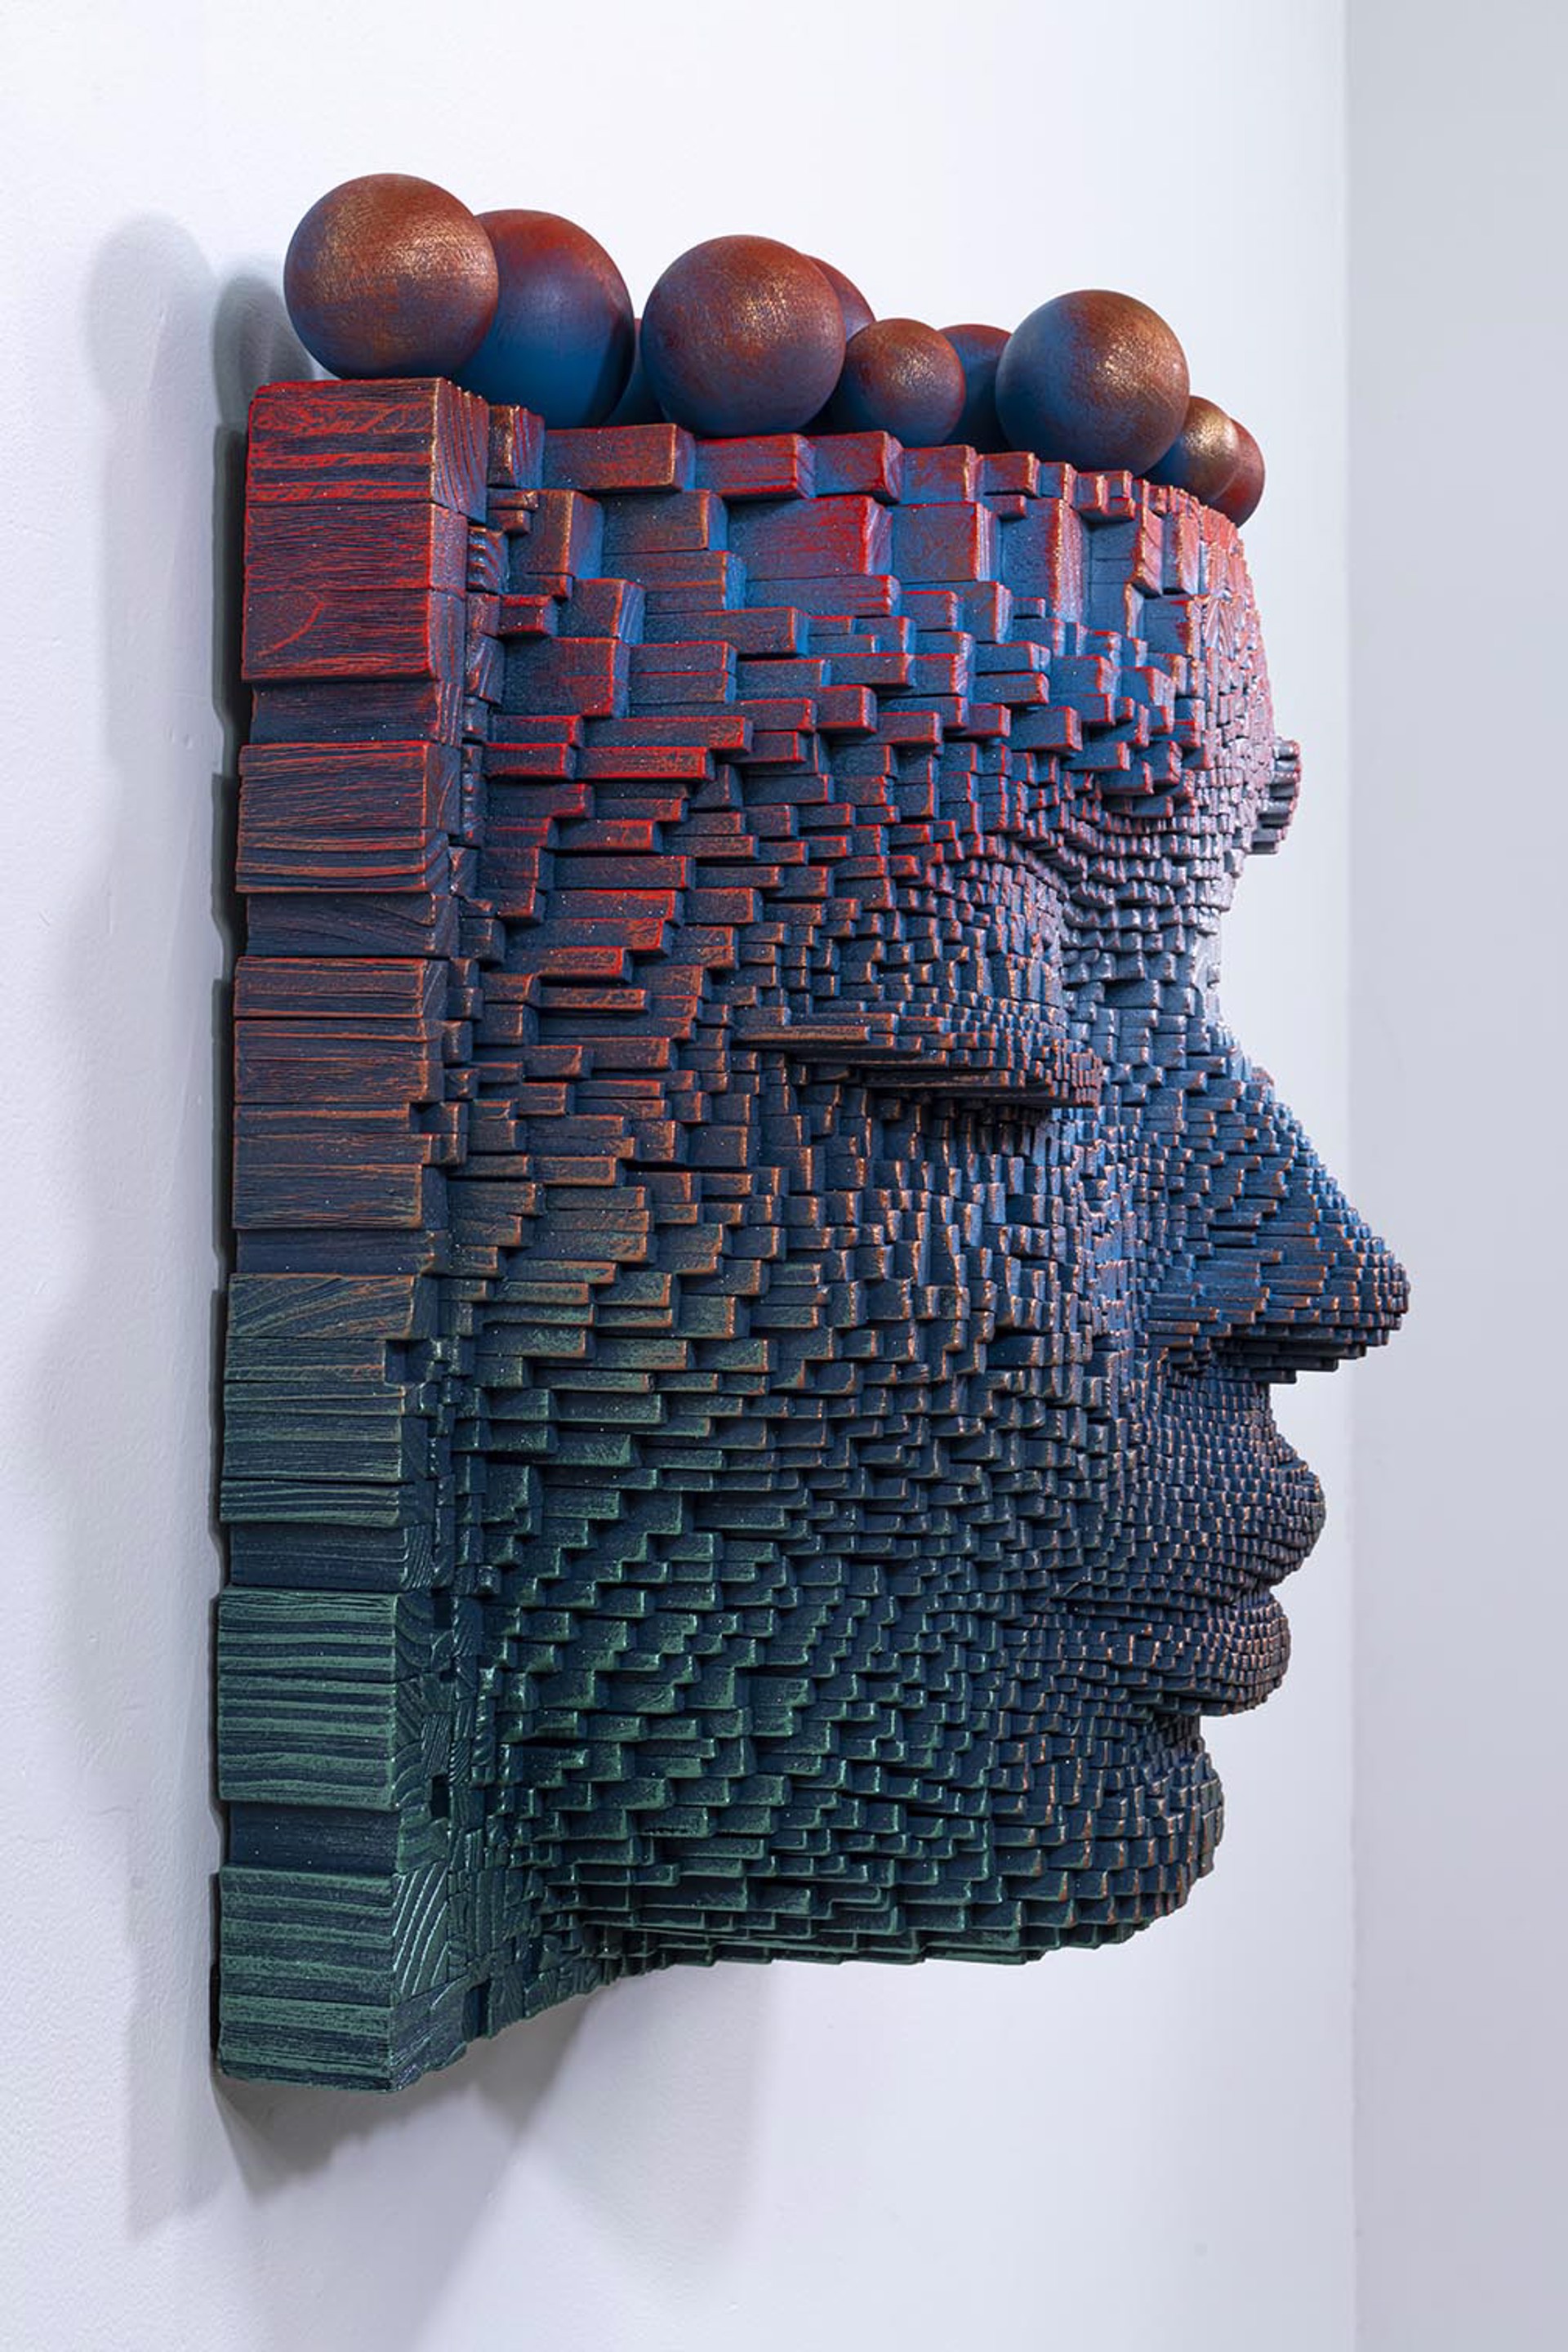 Mask #147 by Gil Bruvel